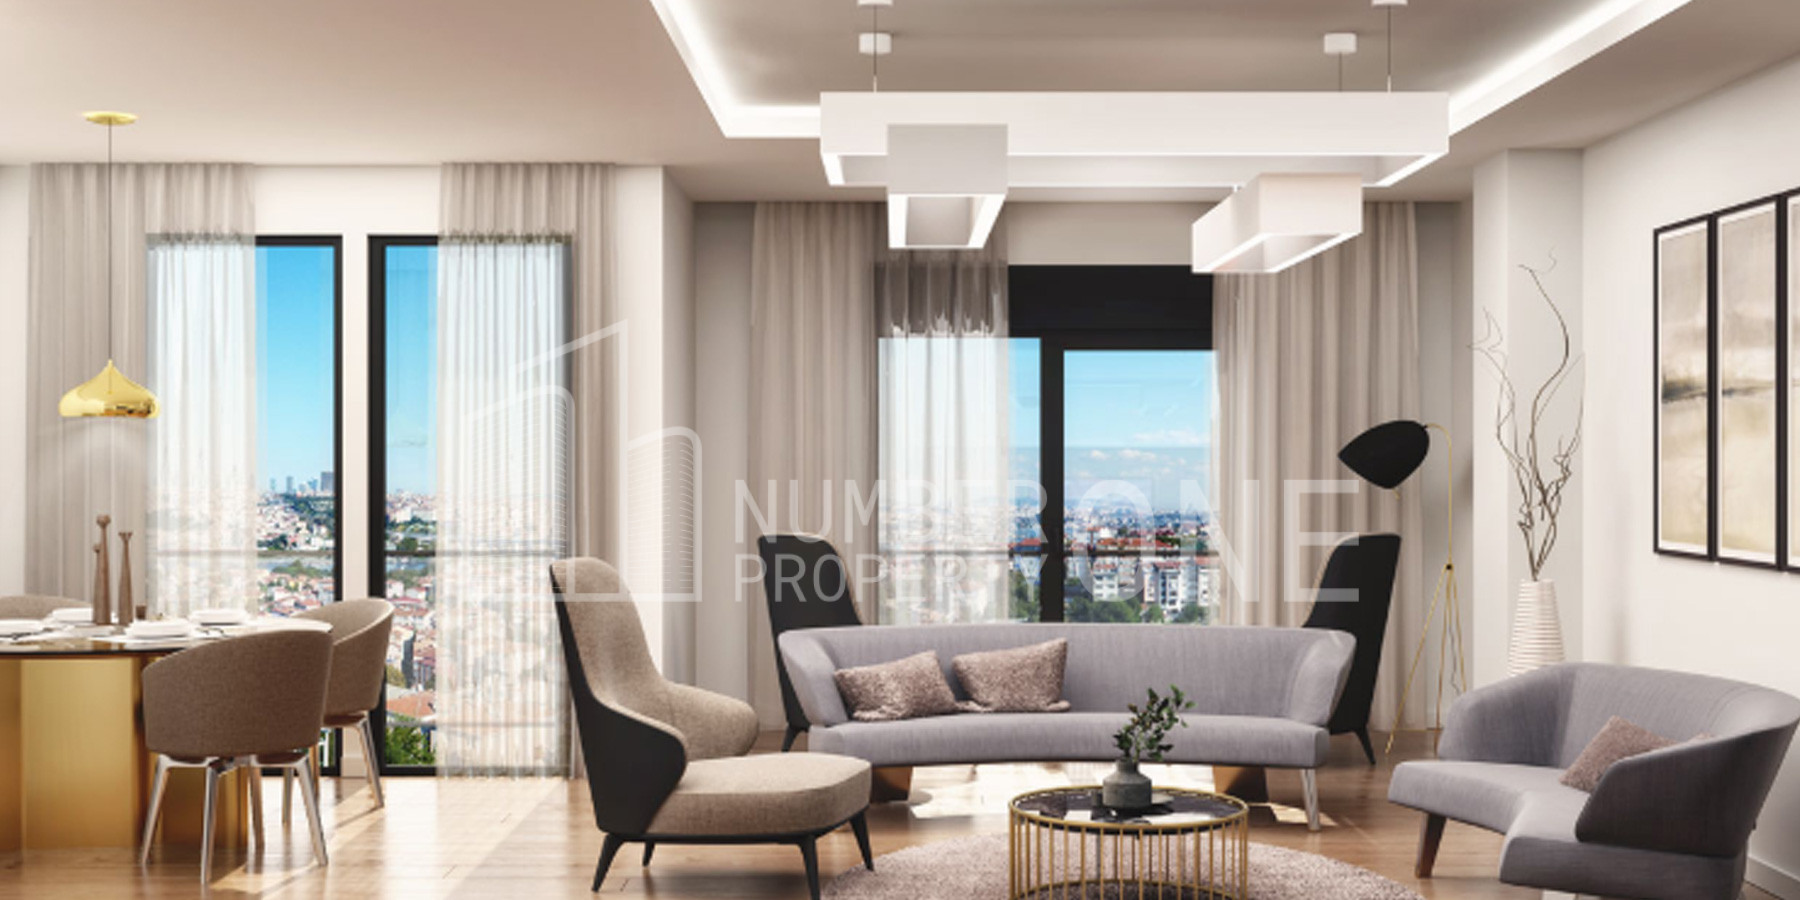 Residential apartments in the historic heart of Istanbul